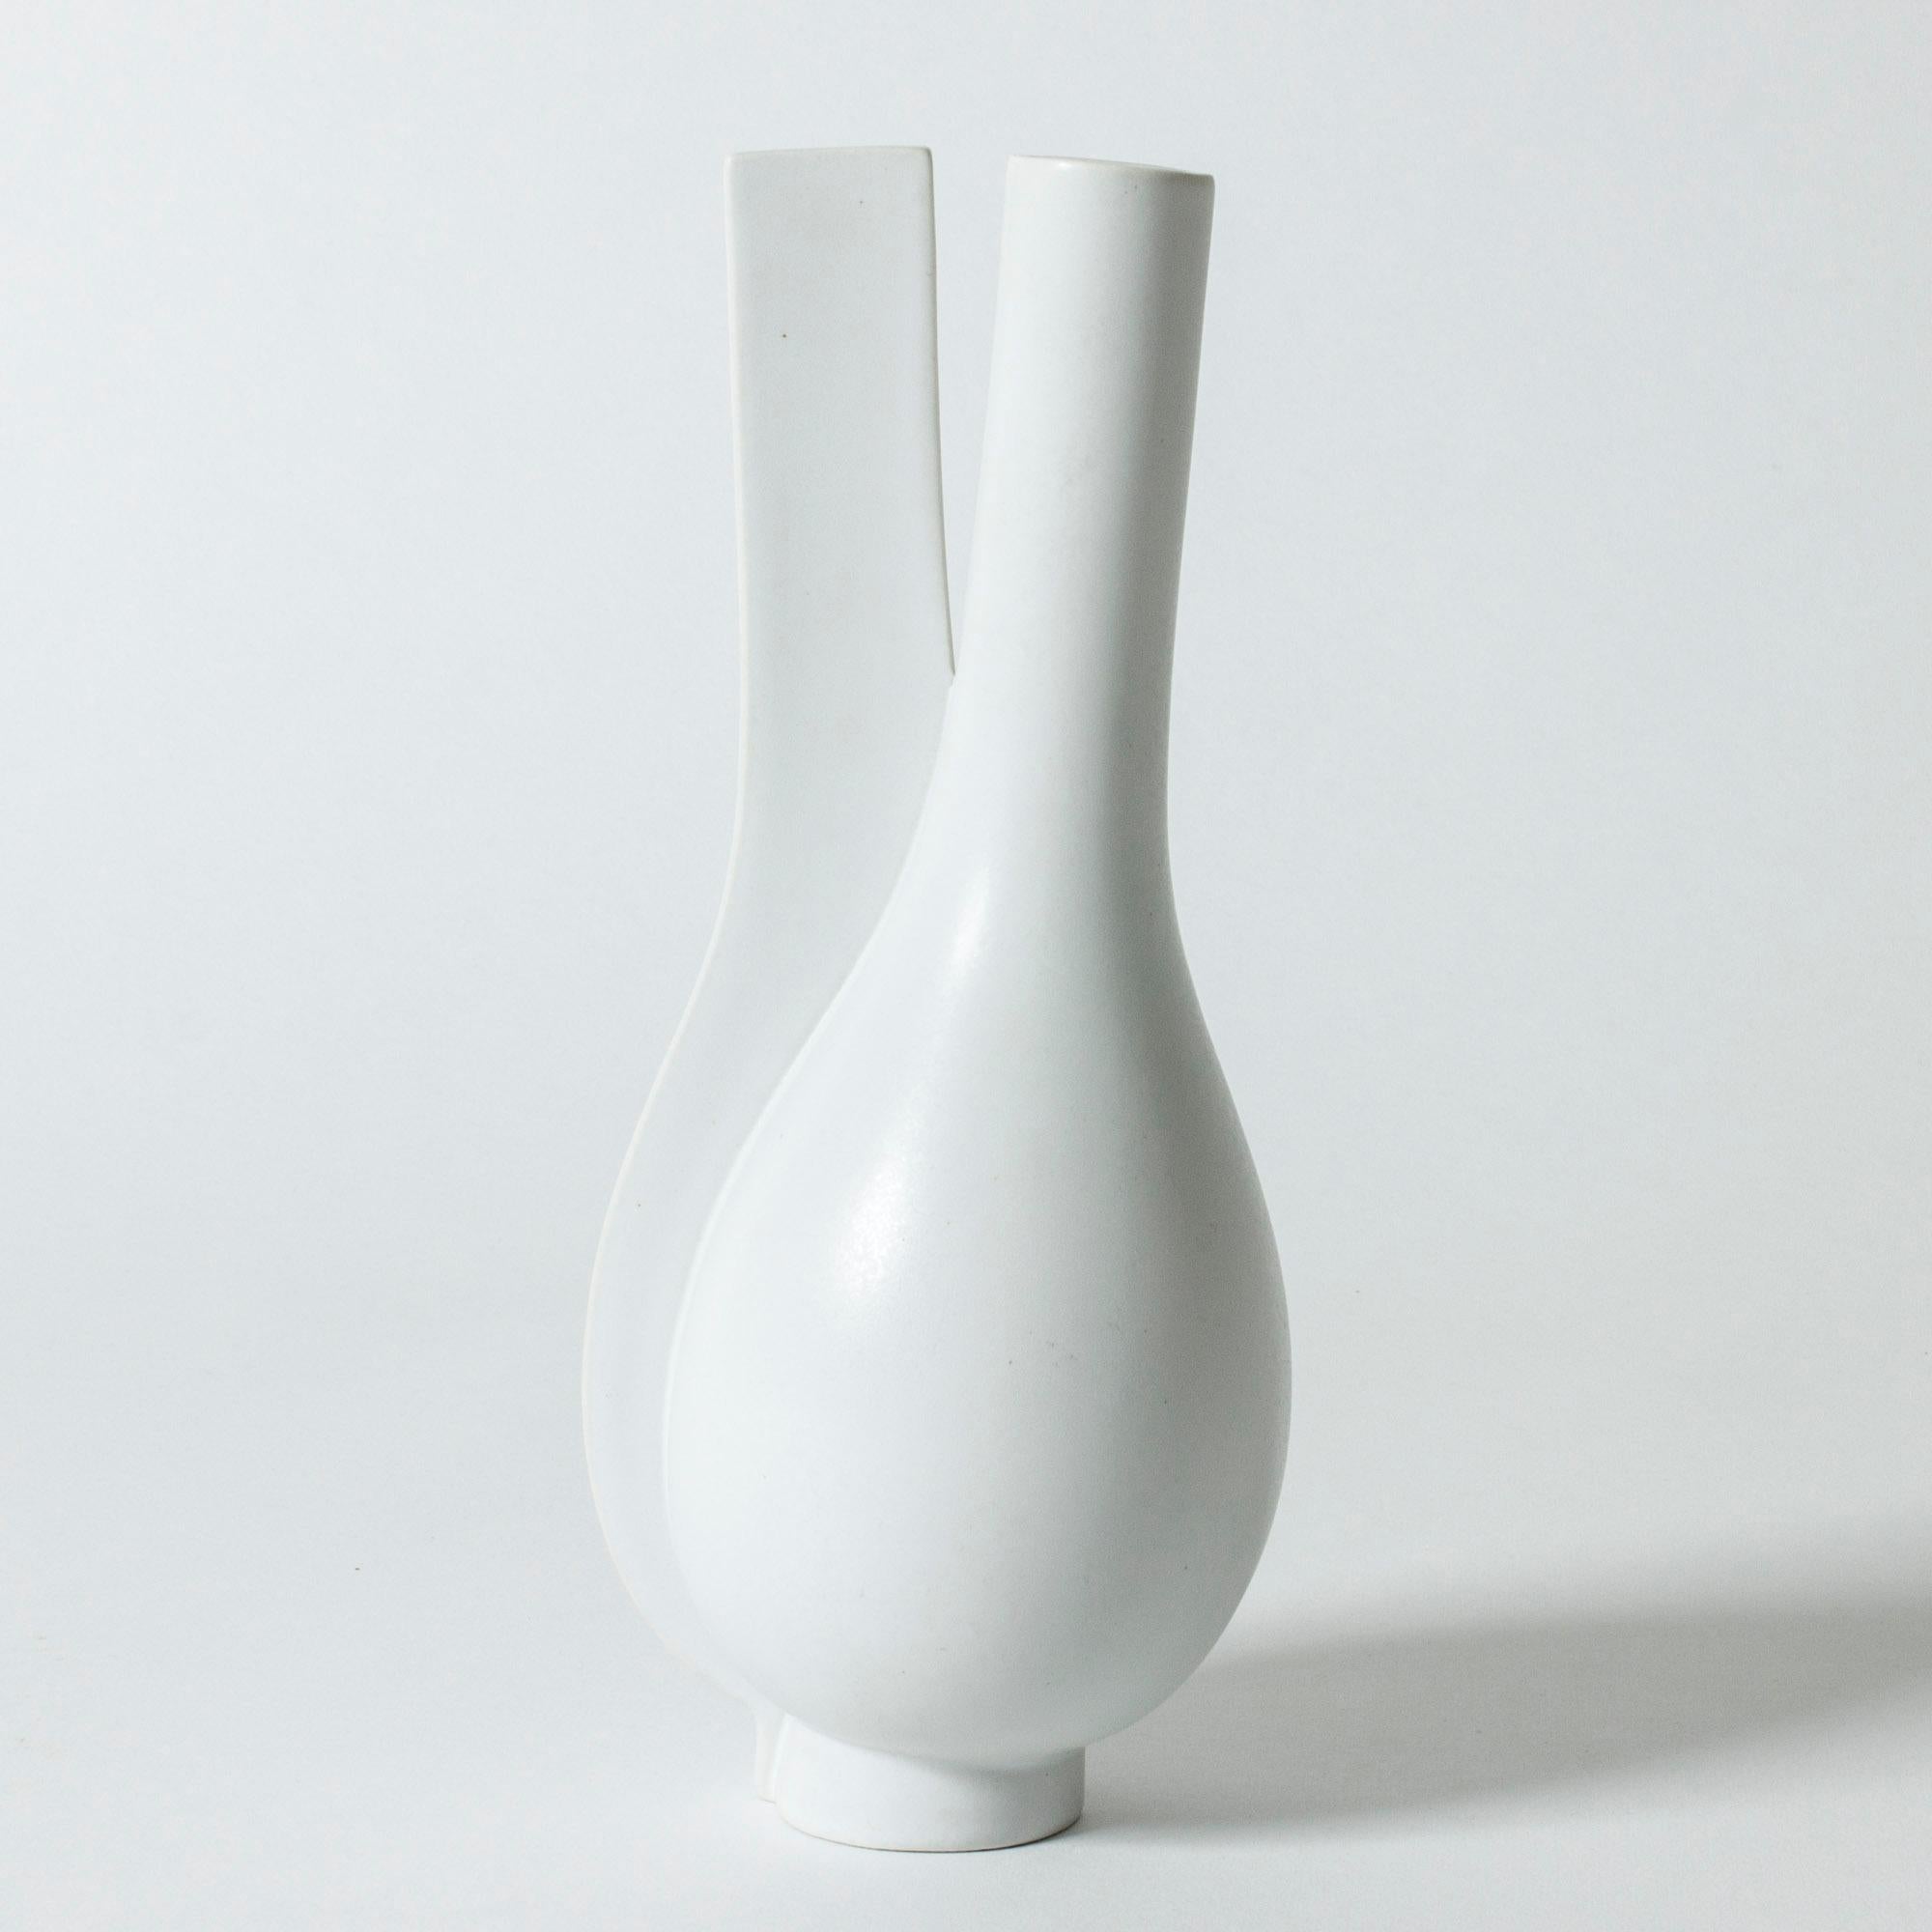 Beautiful “Surrea” vase by Wilhelm Kåge, with a striking, skewed form. Glazed with white carrara glaze. Very cool shadow effect.

The “Surrea” stoneware series was first introduced in 1940, inspired by purism and the work of Le Corbusier. It